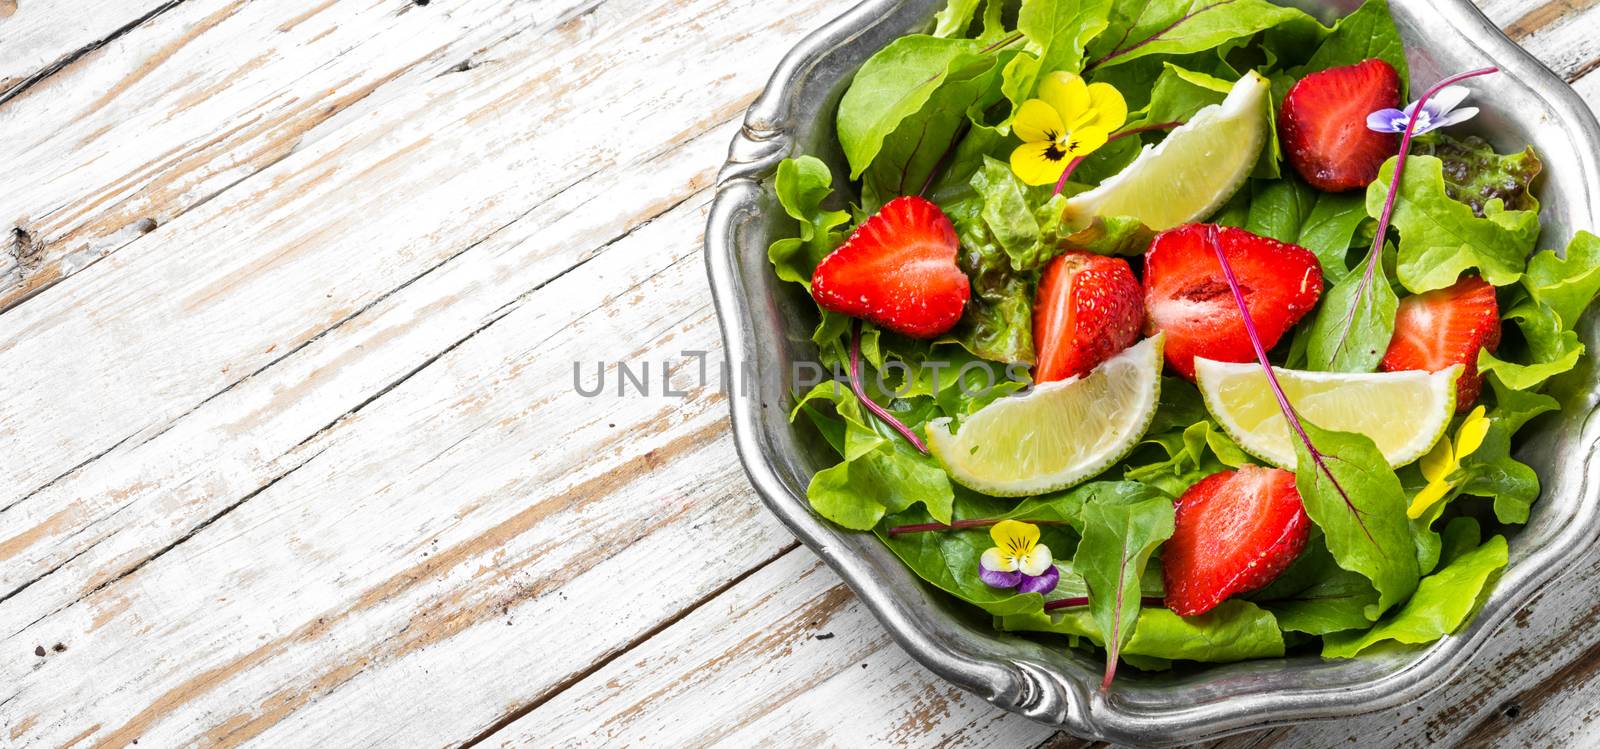 Light salad with greens, strawberries and lime.Summer food